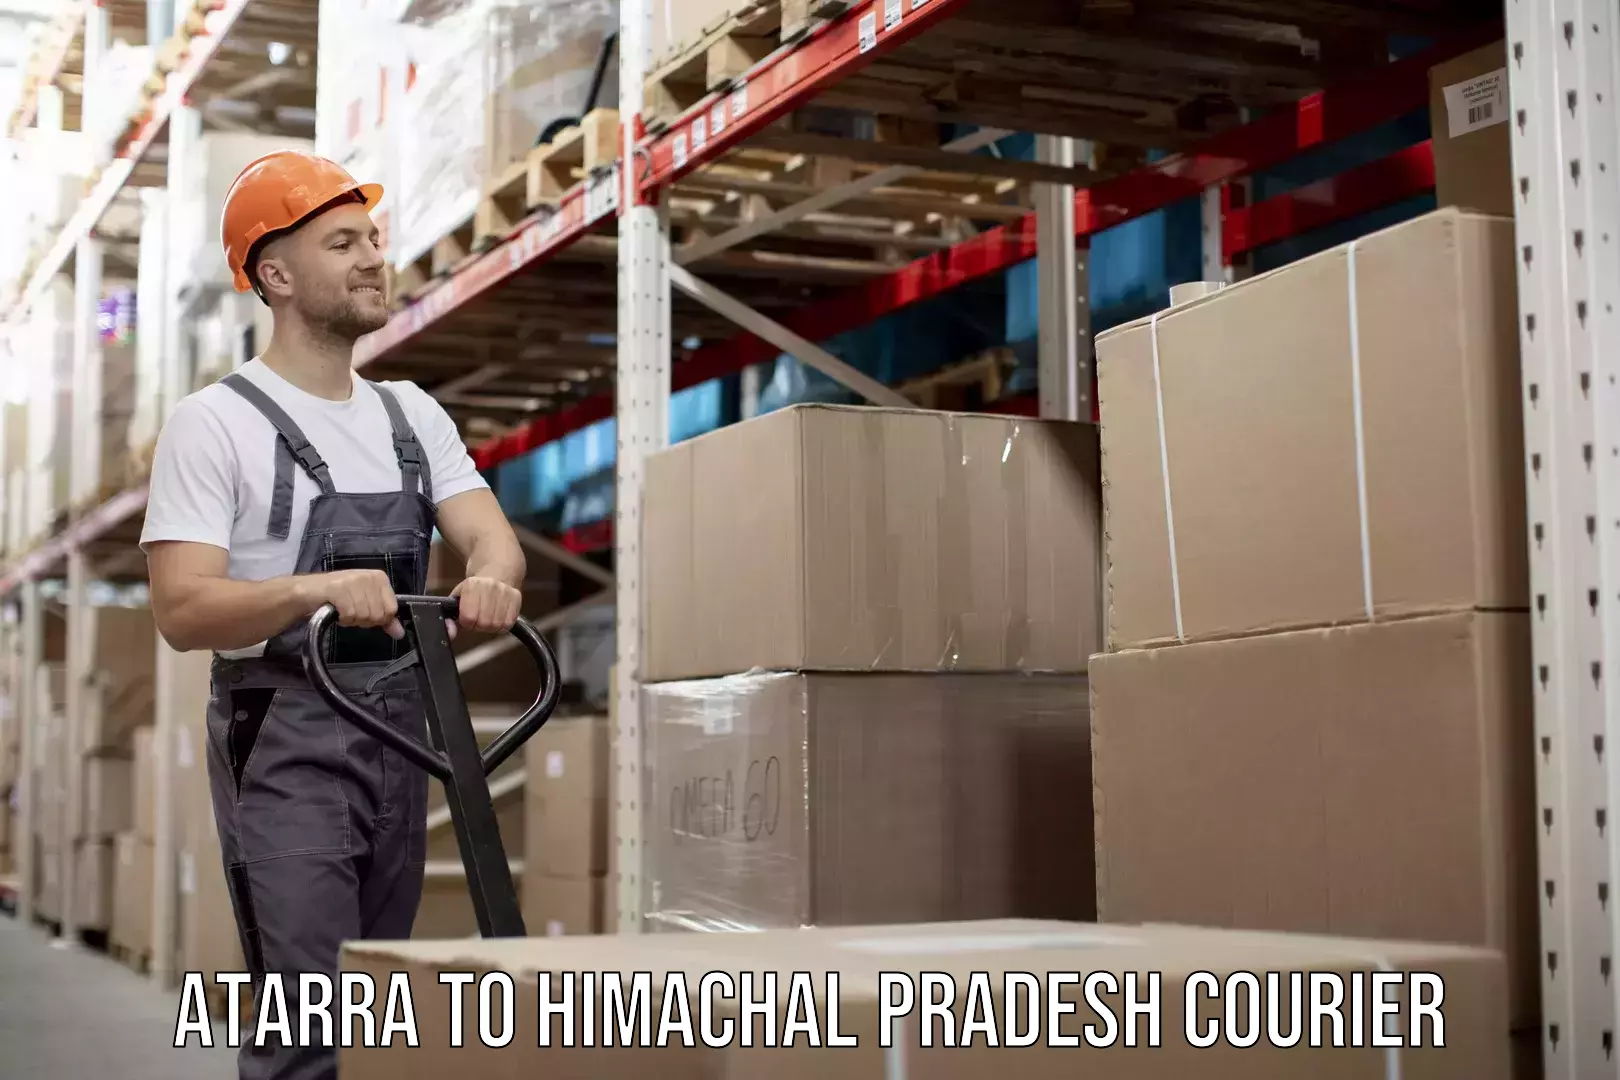 Next-day delivery options Atarra to Himachal Pradesh